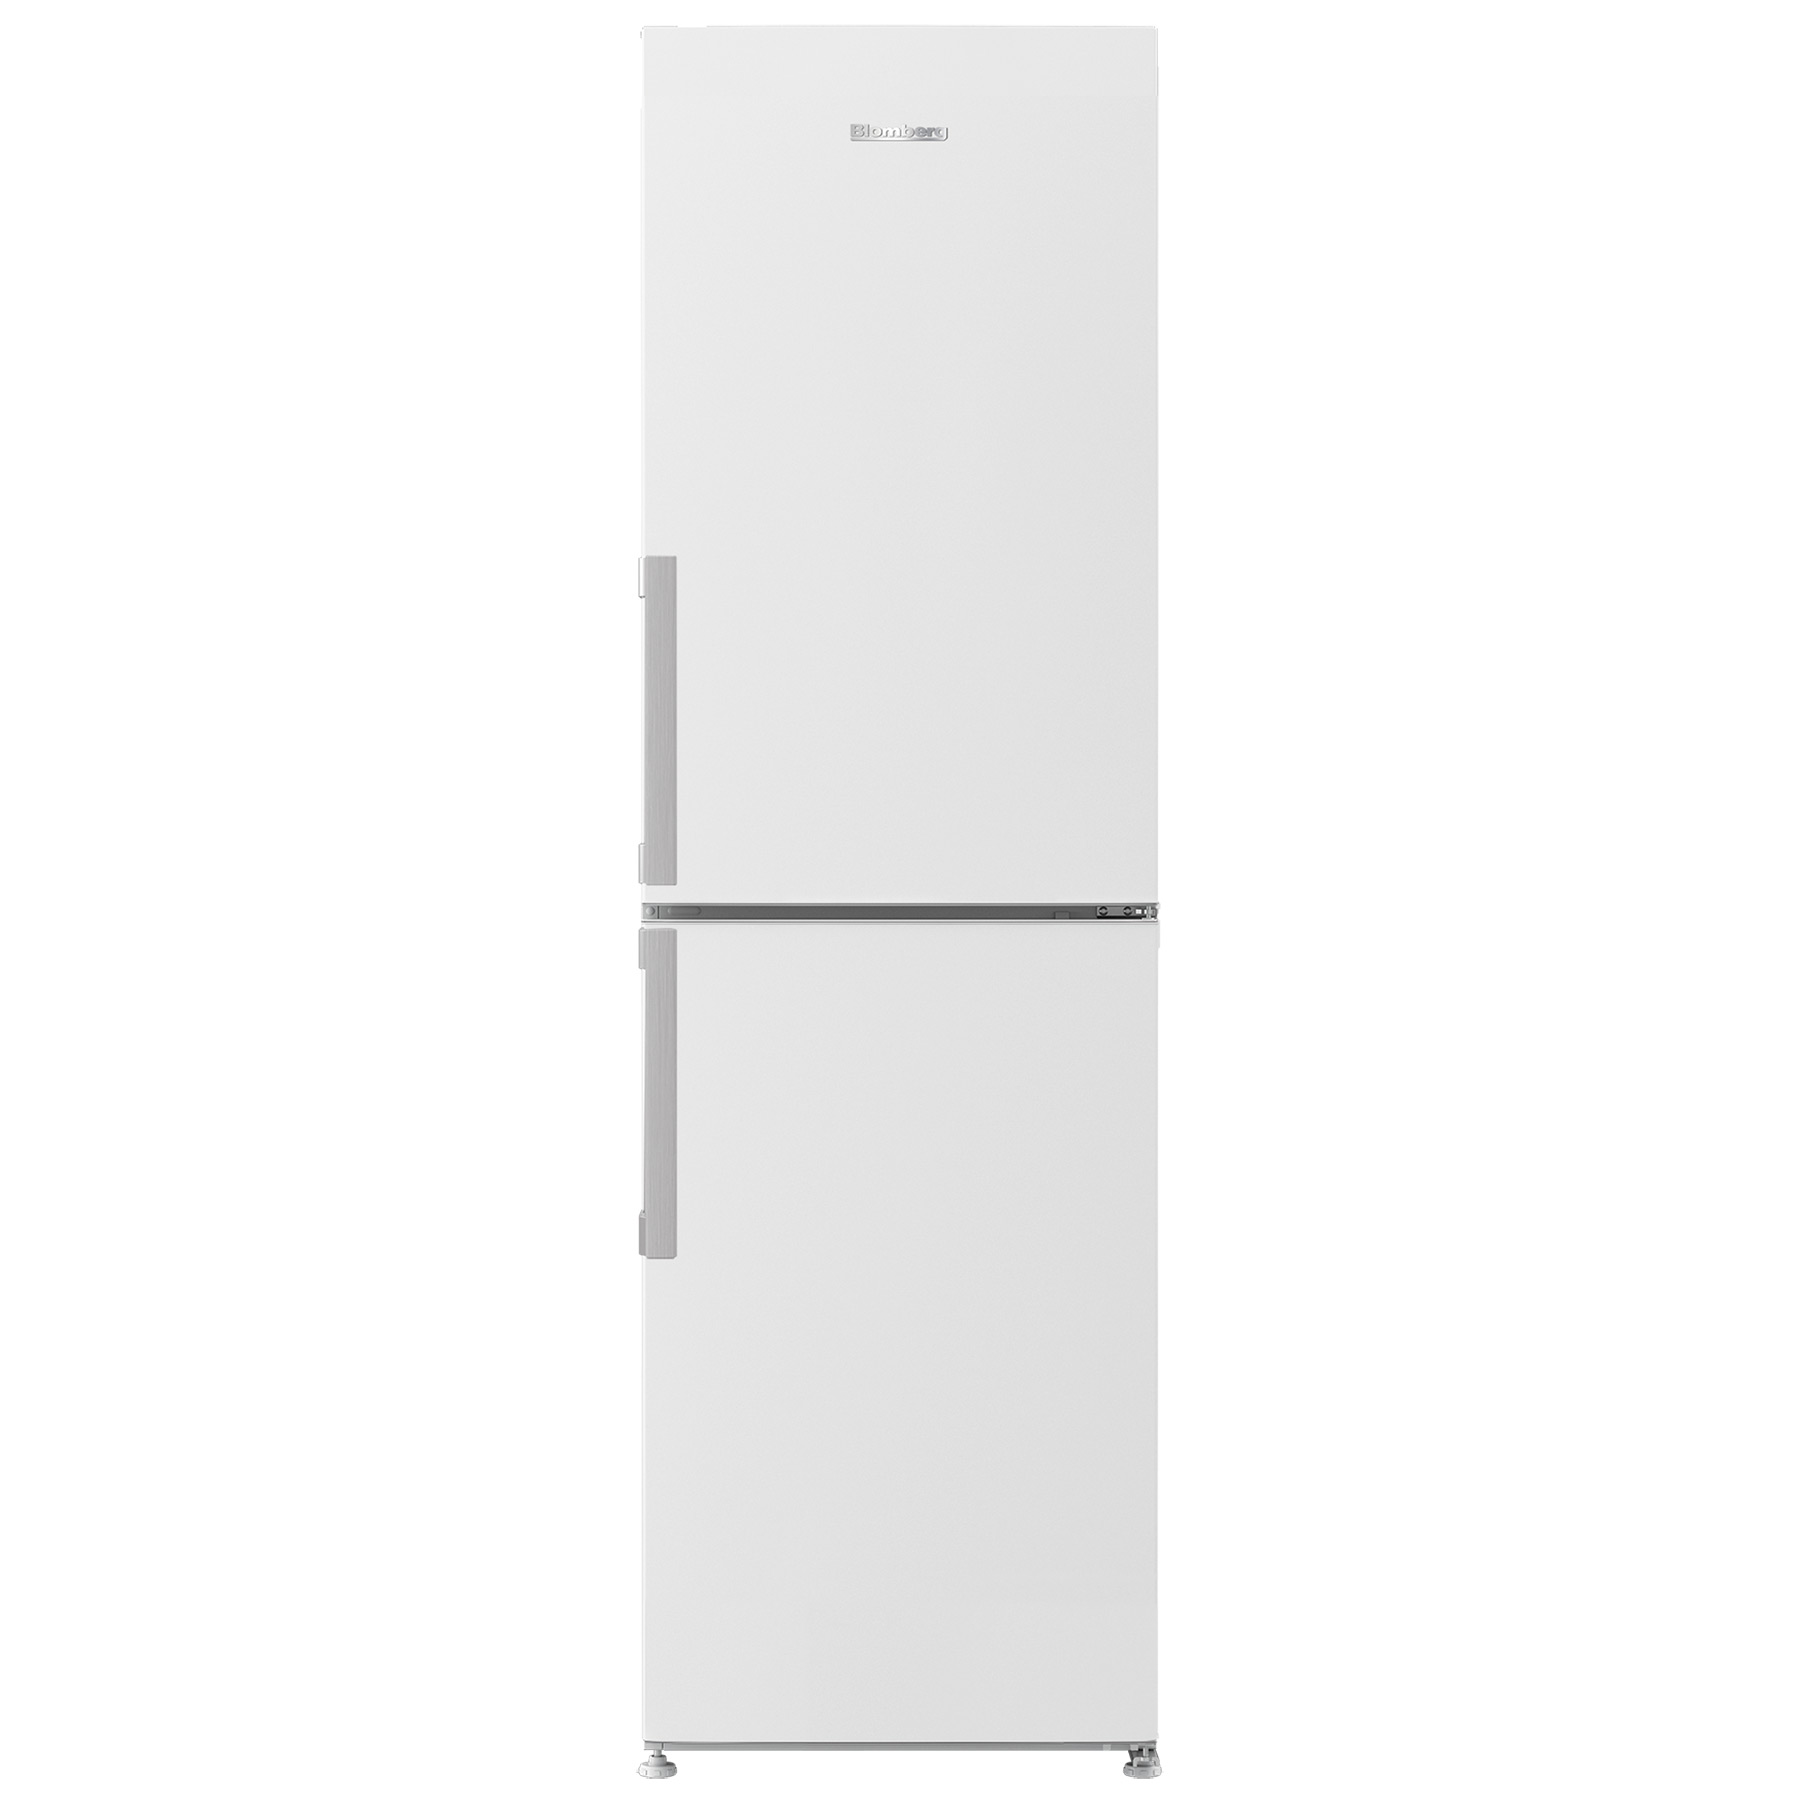 Blomberg KGM4663 60cm Frost Free Fridge Freezer in White 1 91m F Rated